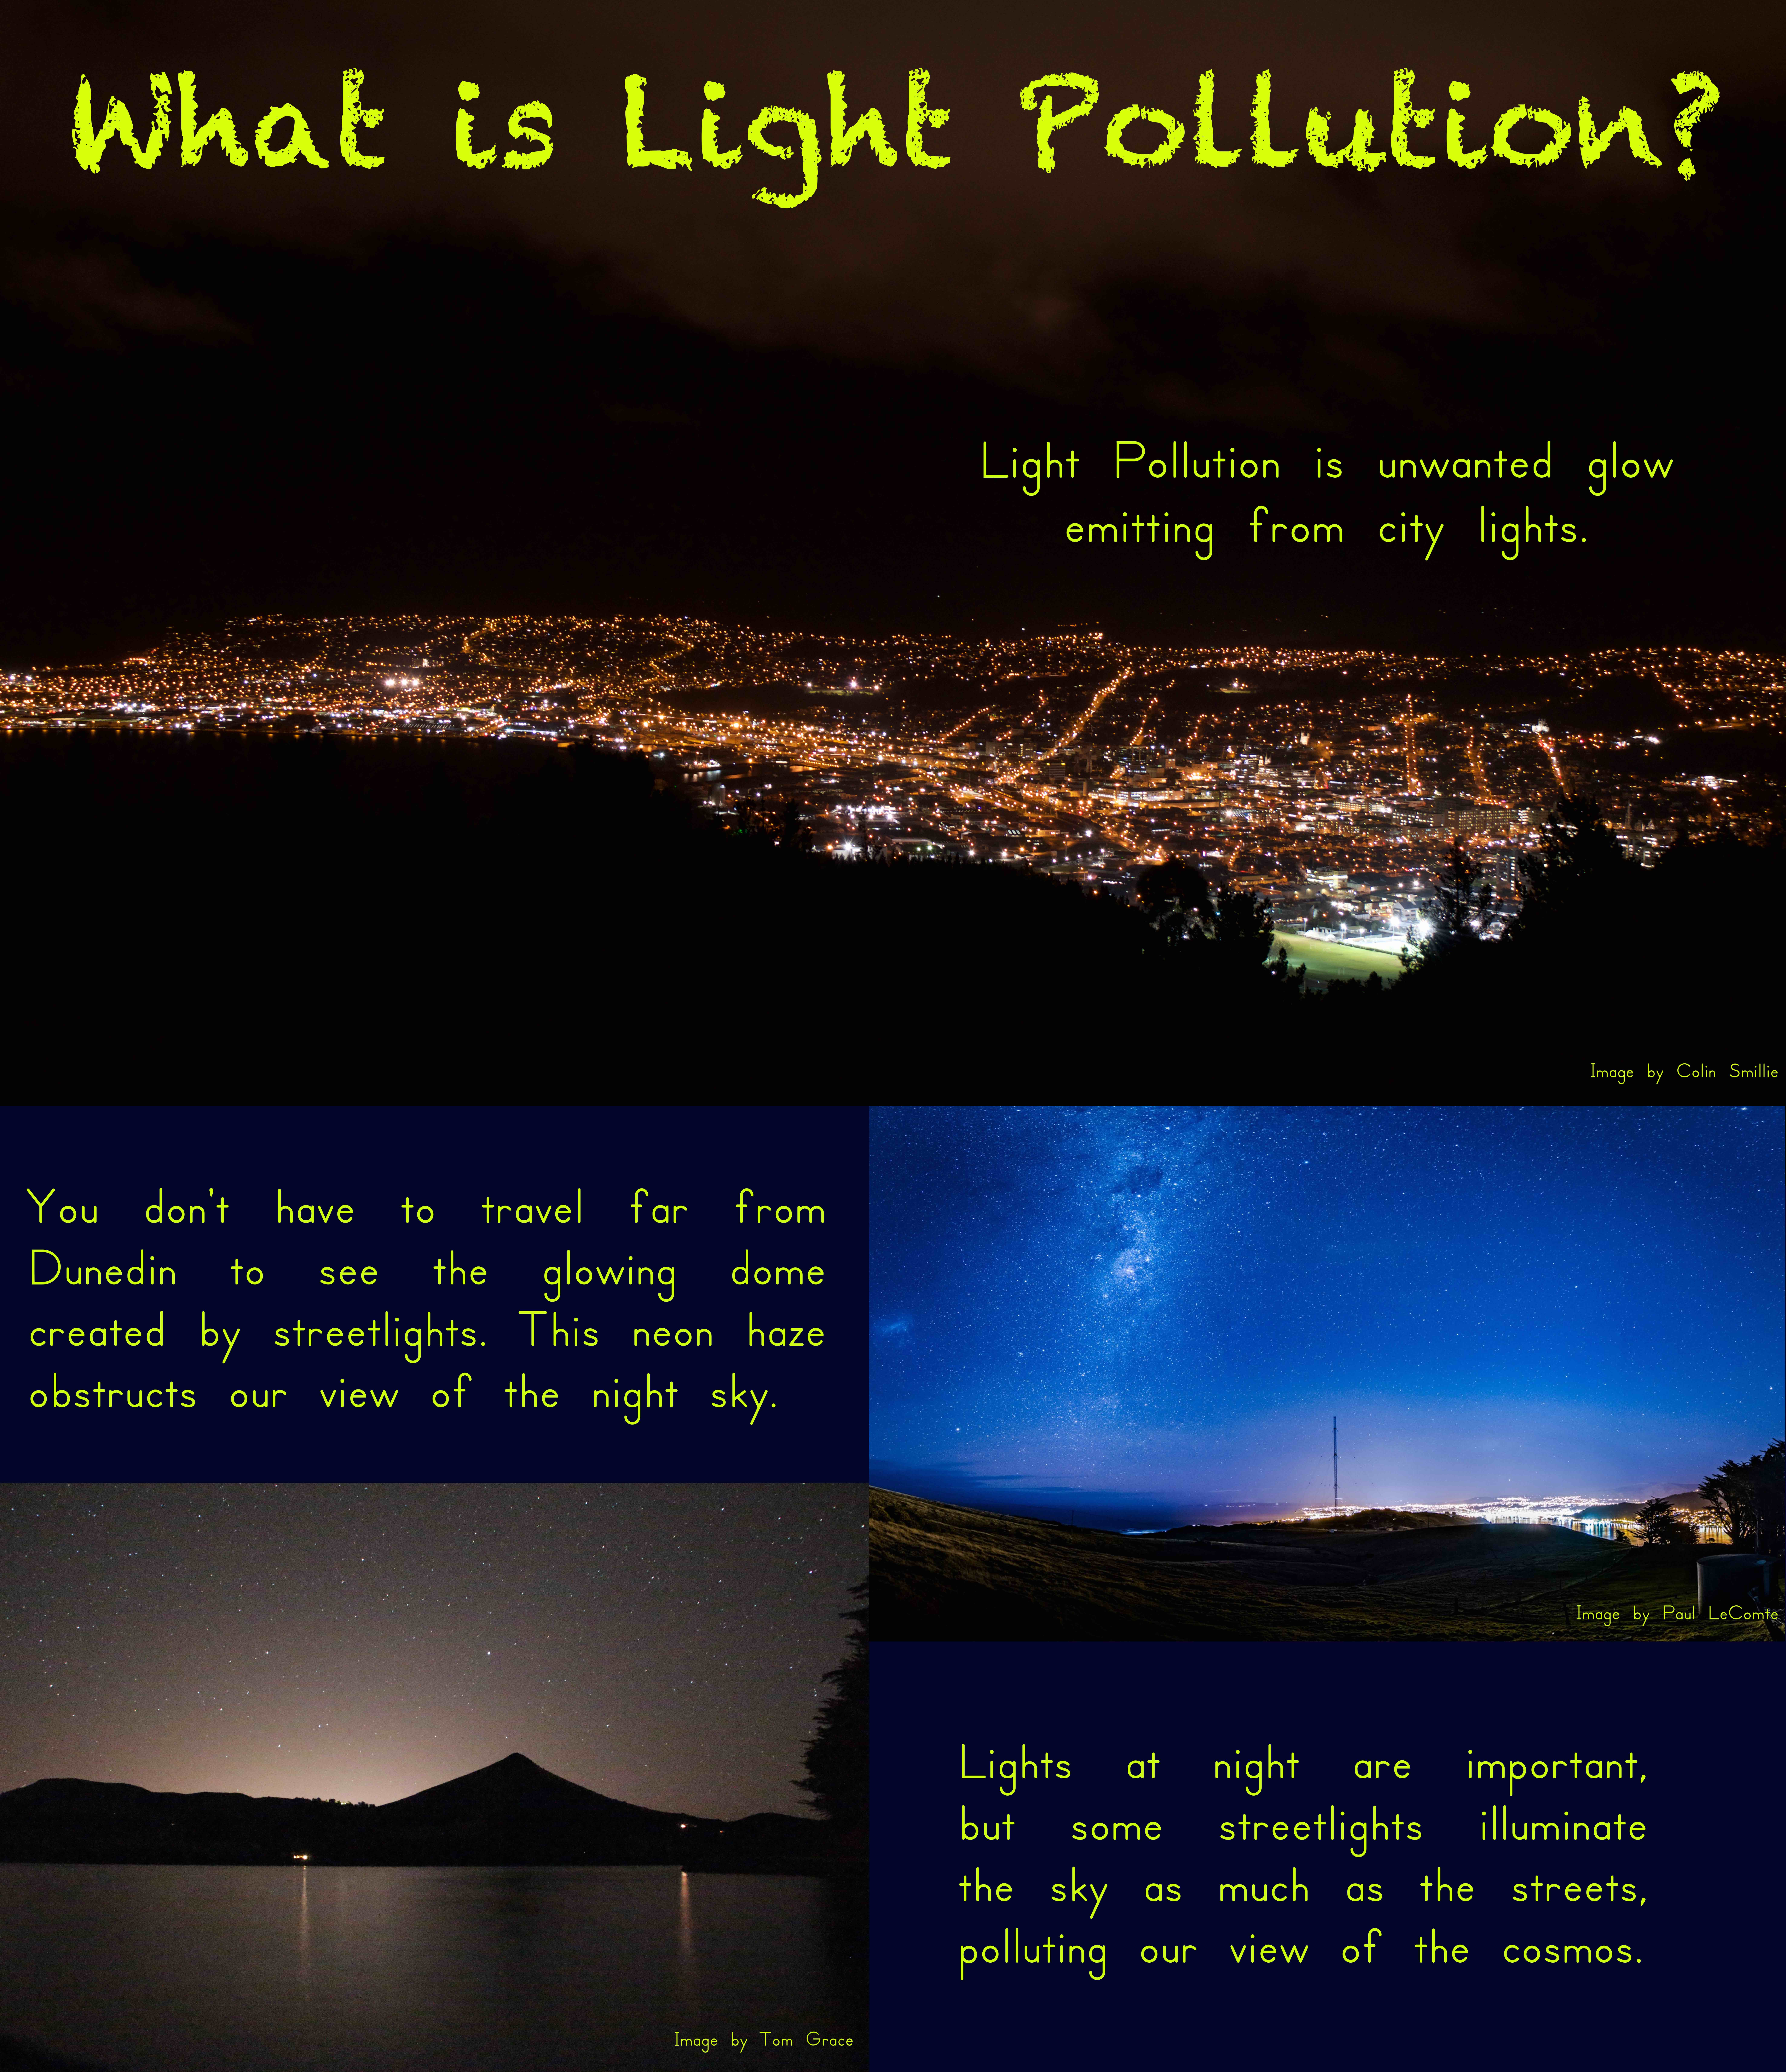 What is light pollution